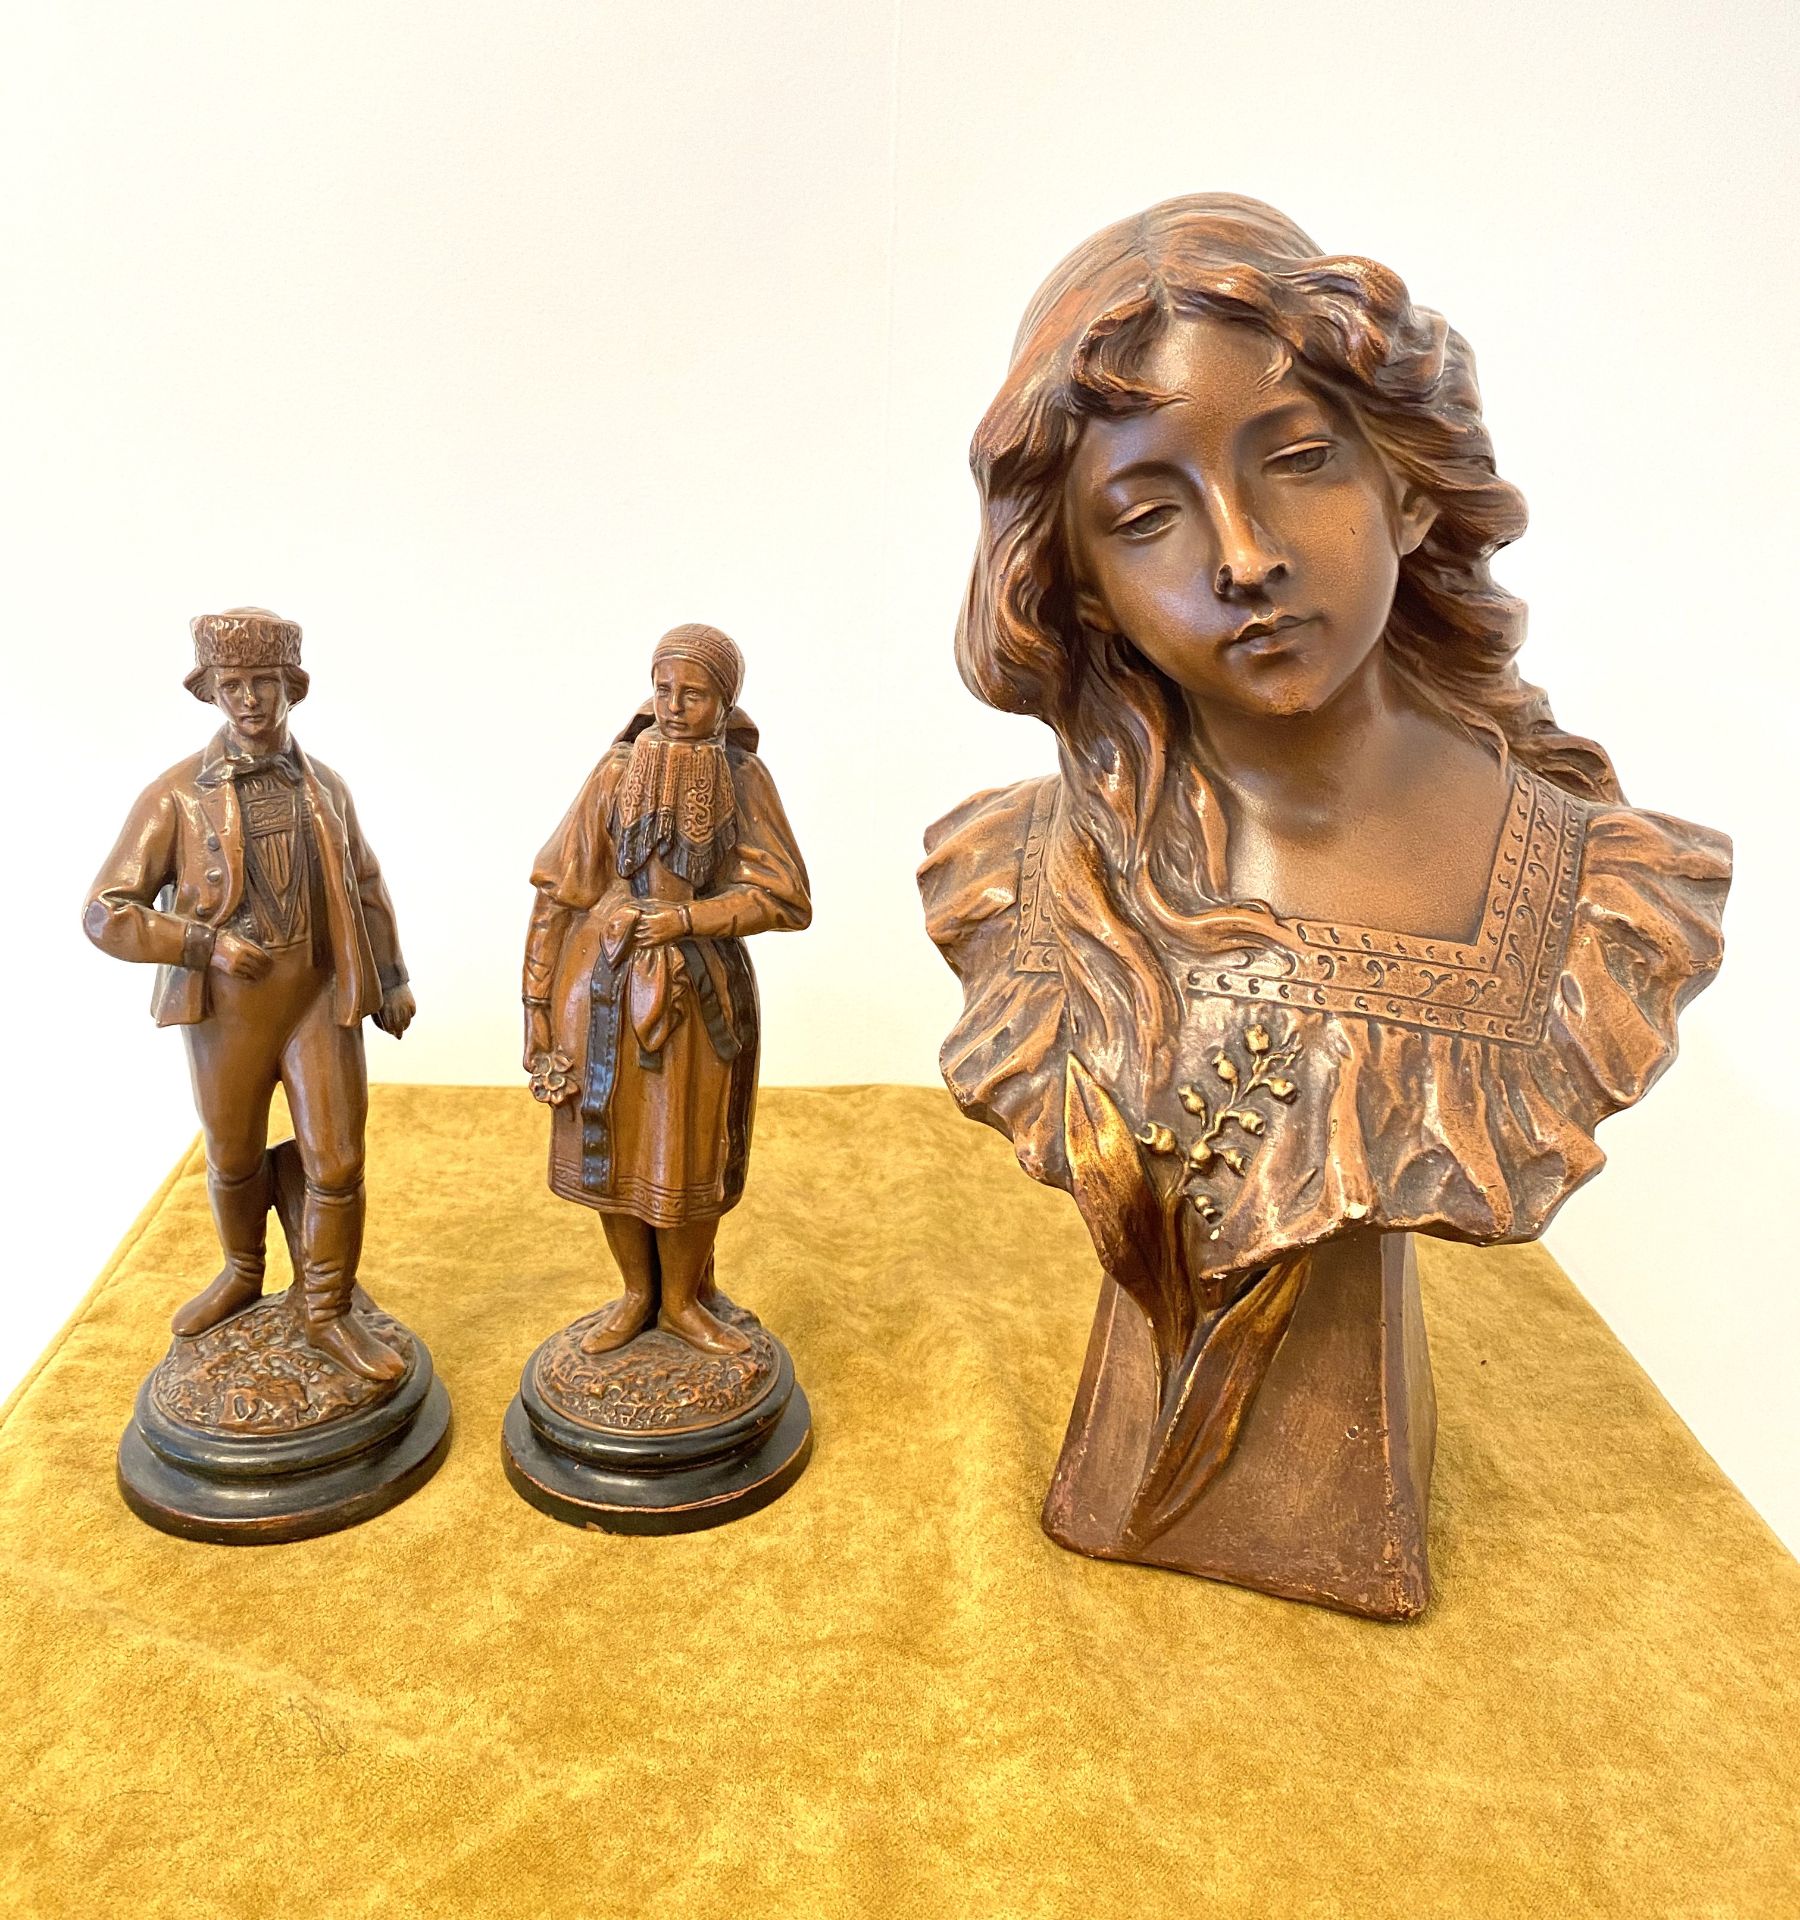 Lot of 3 vintage statues in Terracotta